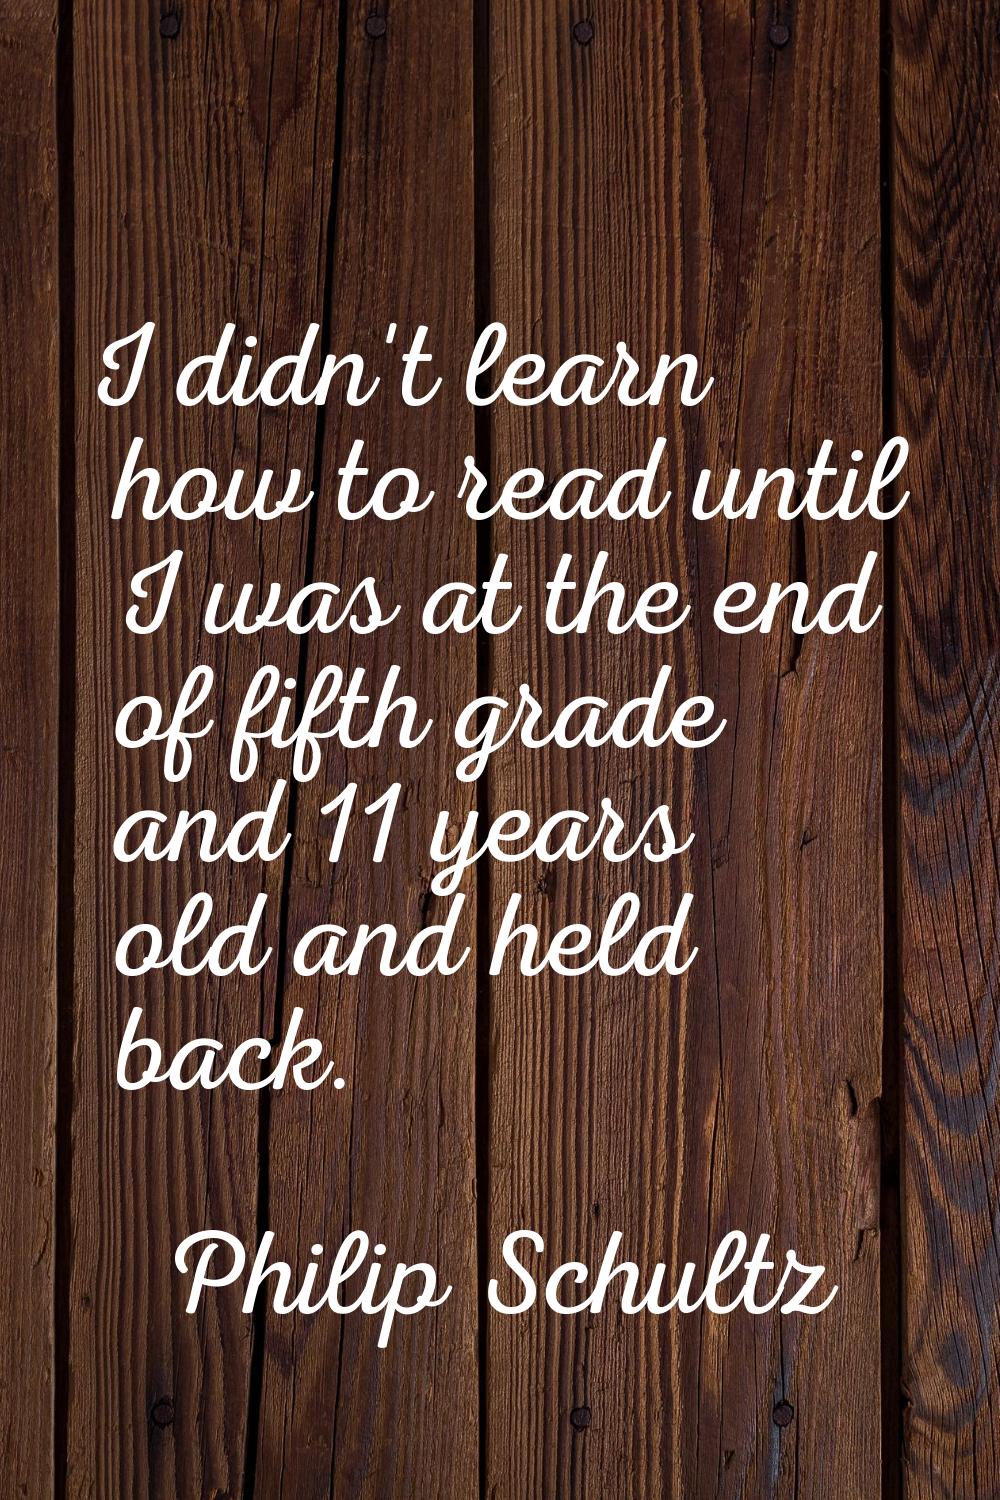 I didn't learn how to read until I was at the end of fifth grade and 11 years old and held back.